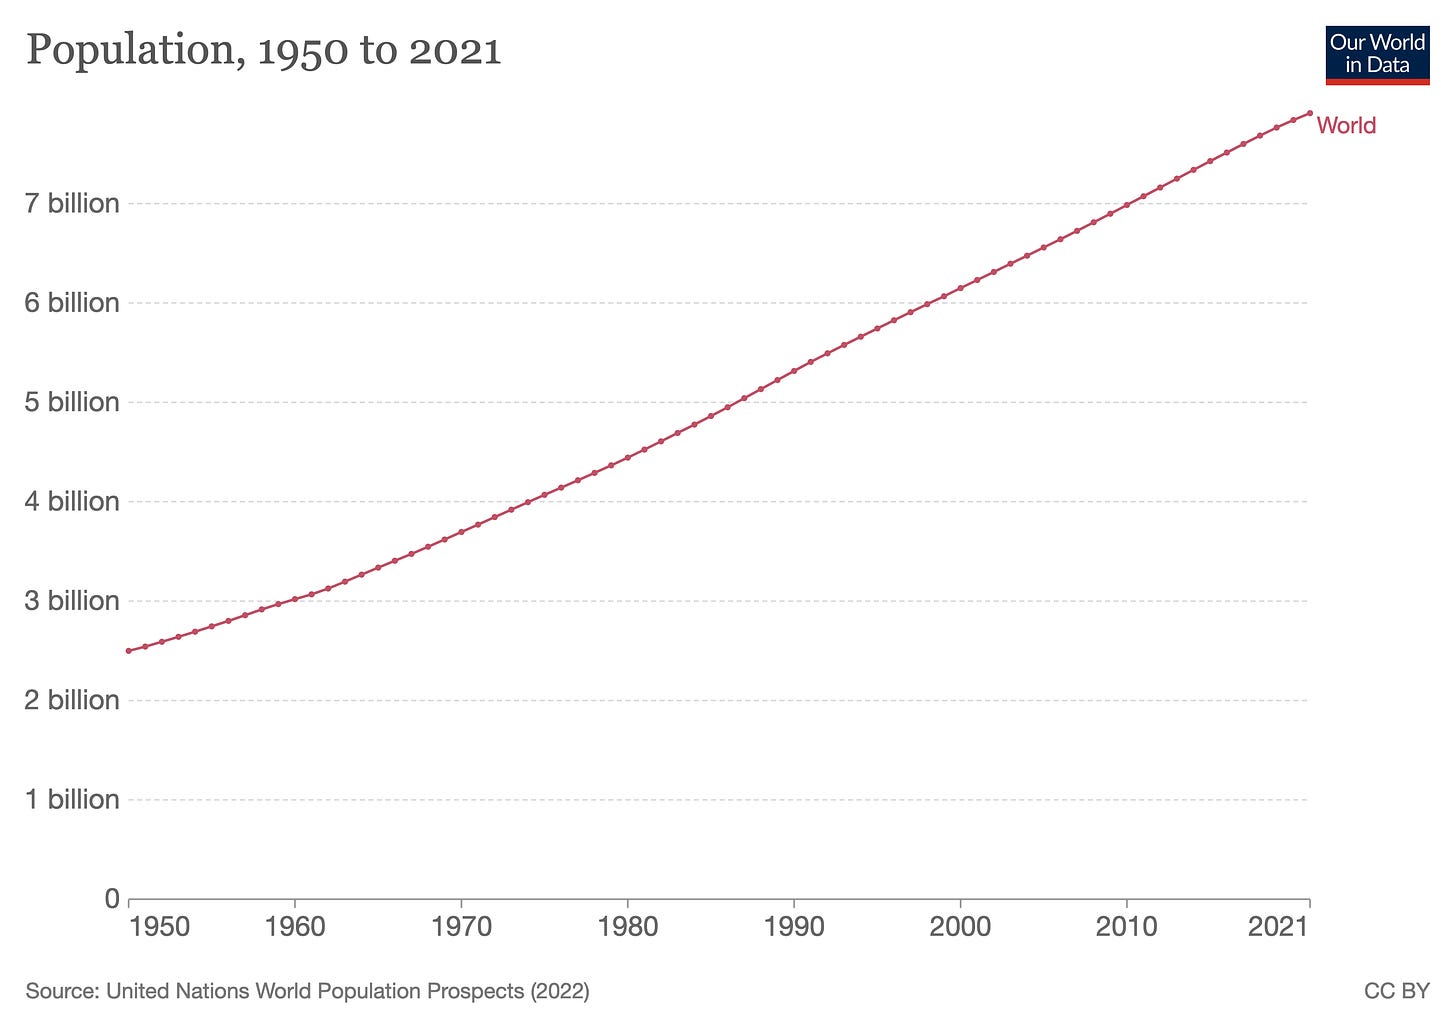 Graph of world population rising in a smooth line from about 2.5 billion in 1950 to almost 8 billion in 2021